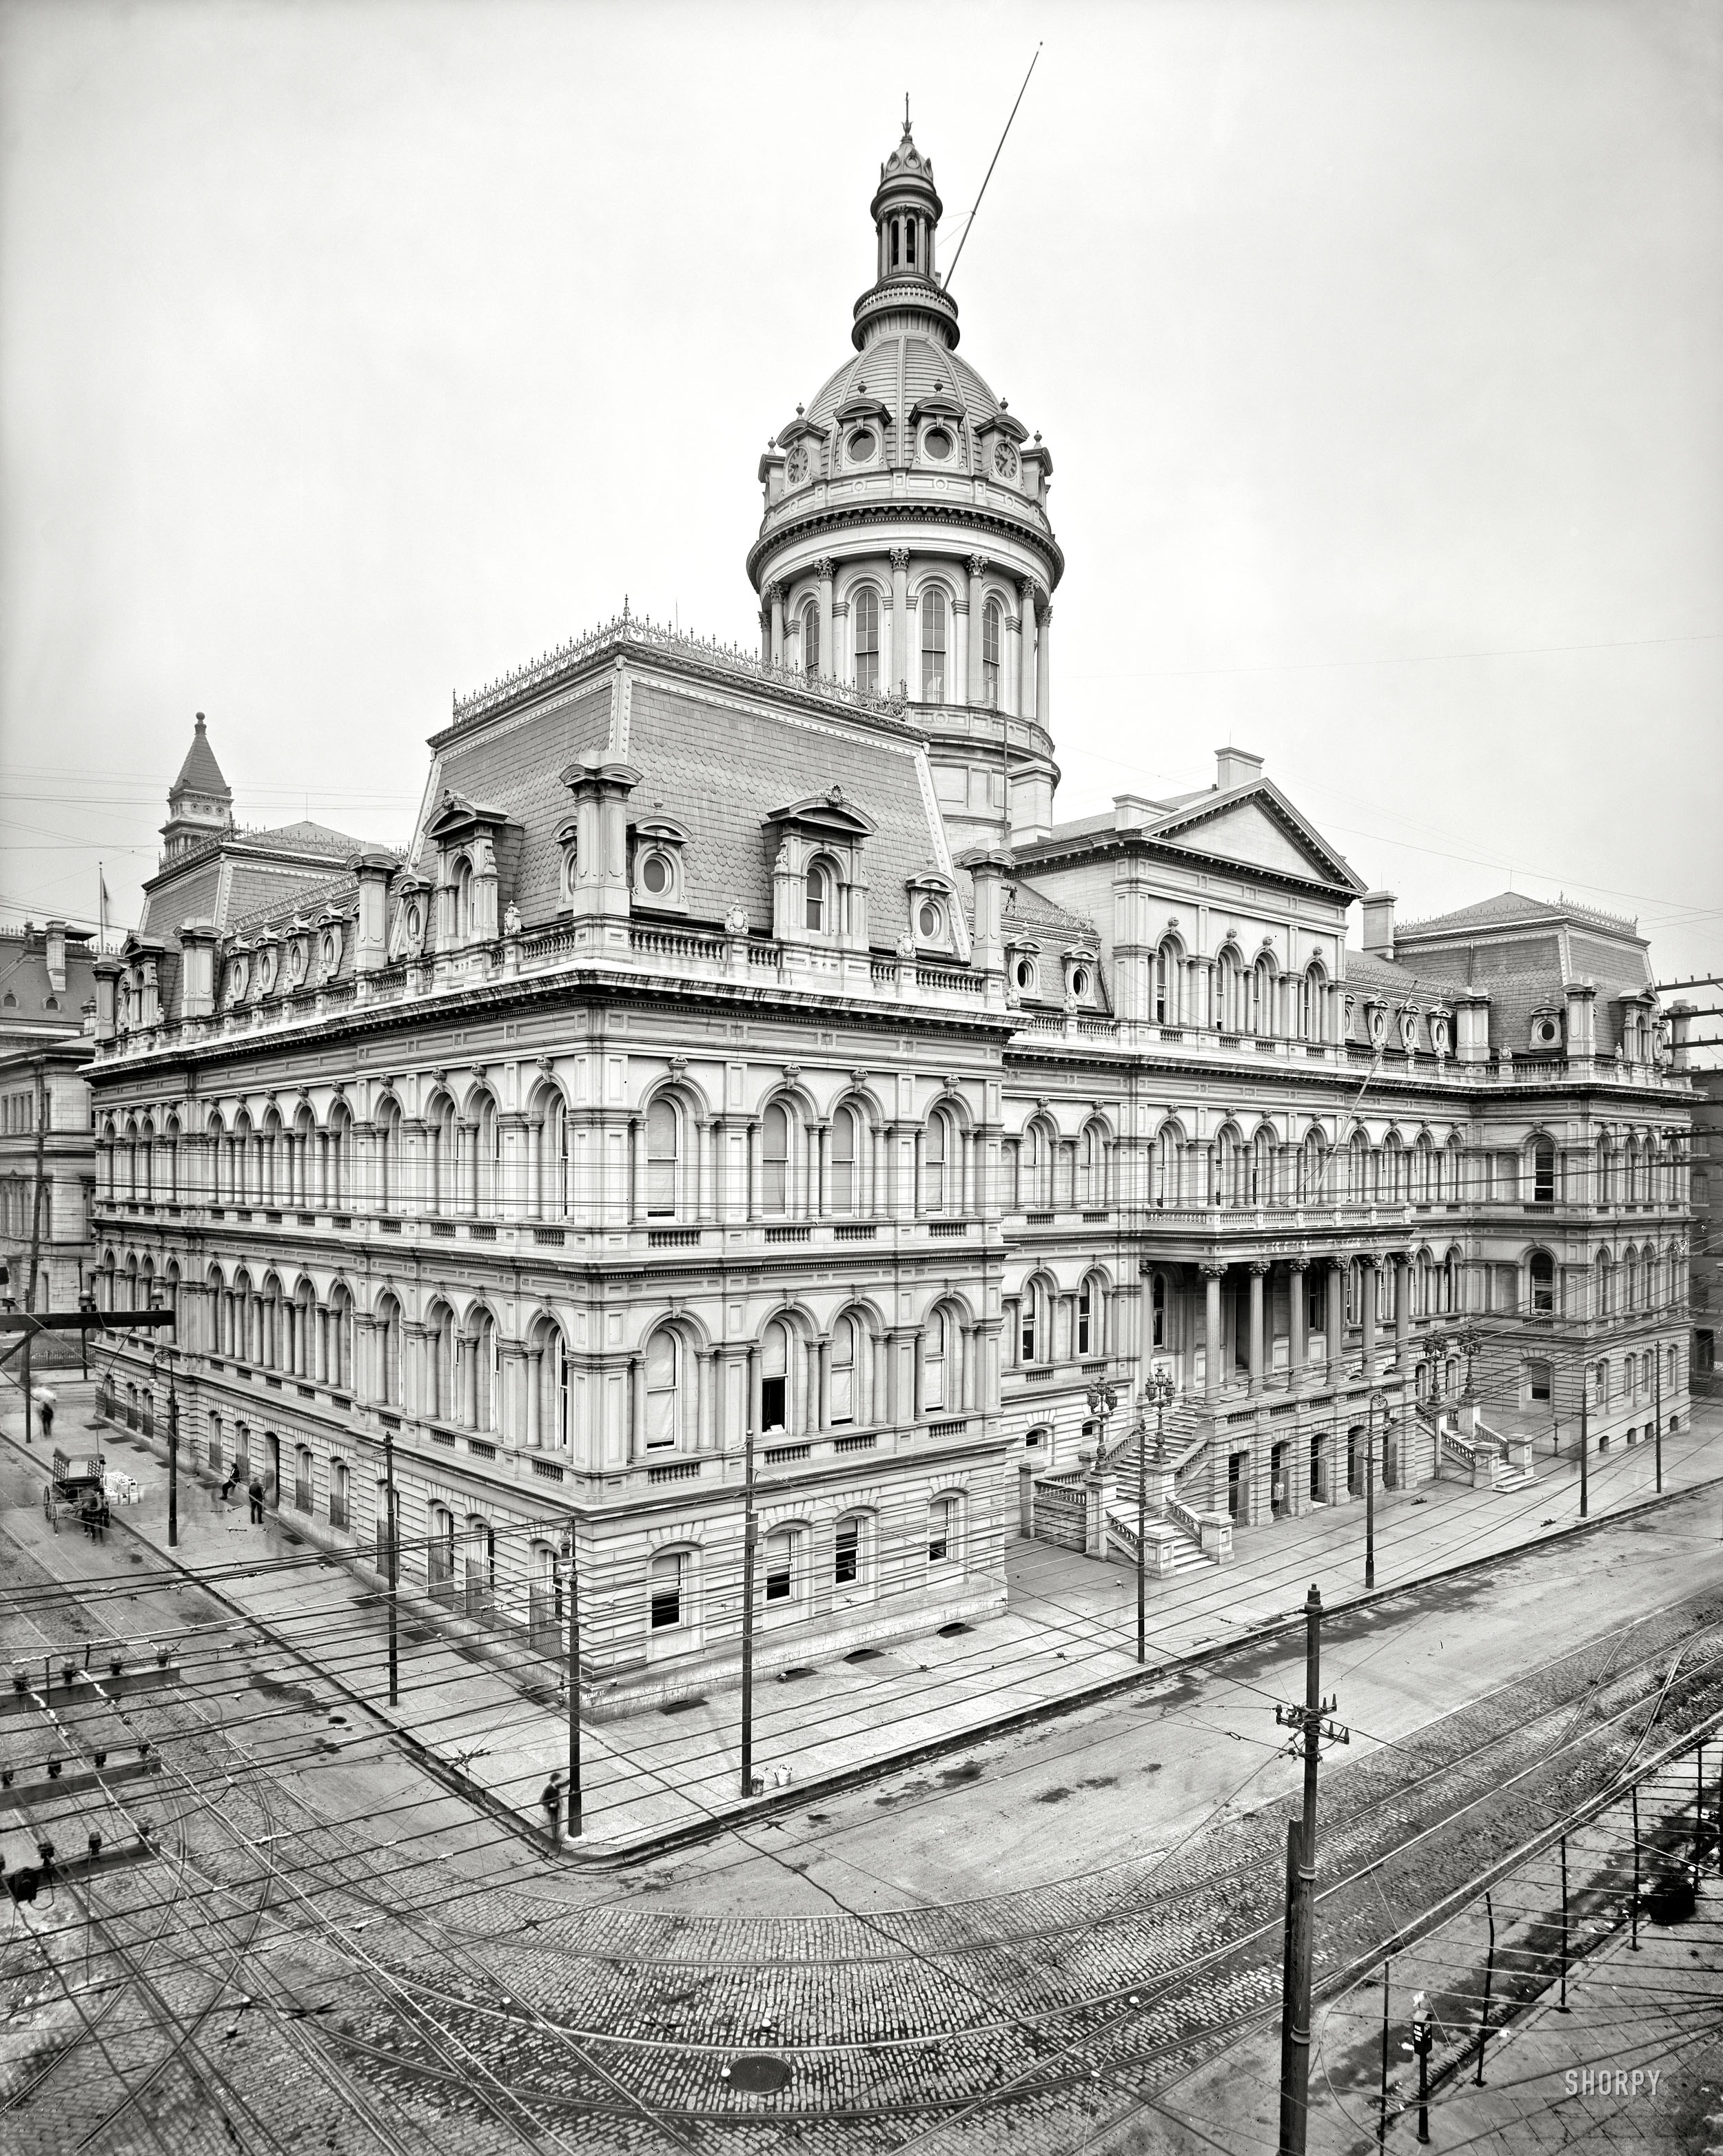 Circa 1900. "Baltimore City Hall." Rising behind a web of wires. 8x10 inch dry plate glass negative, Detroit Publishing Company. View full size.